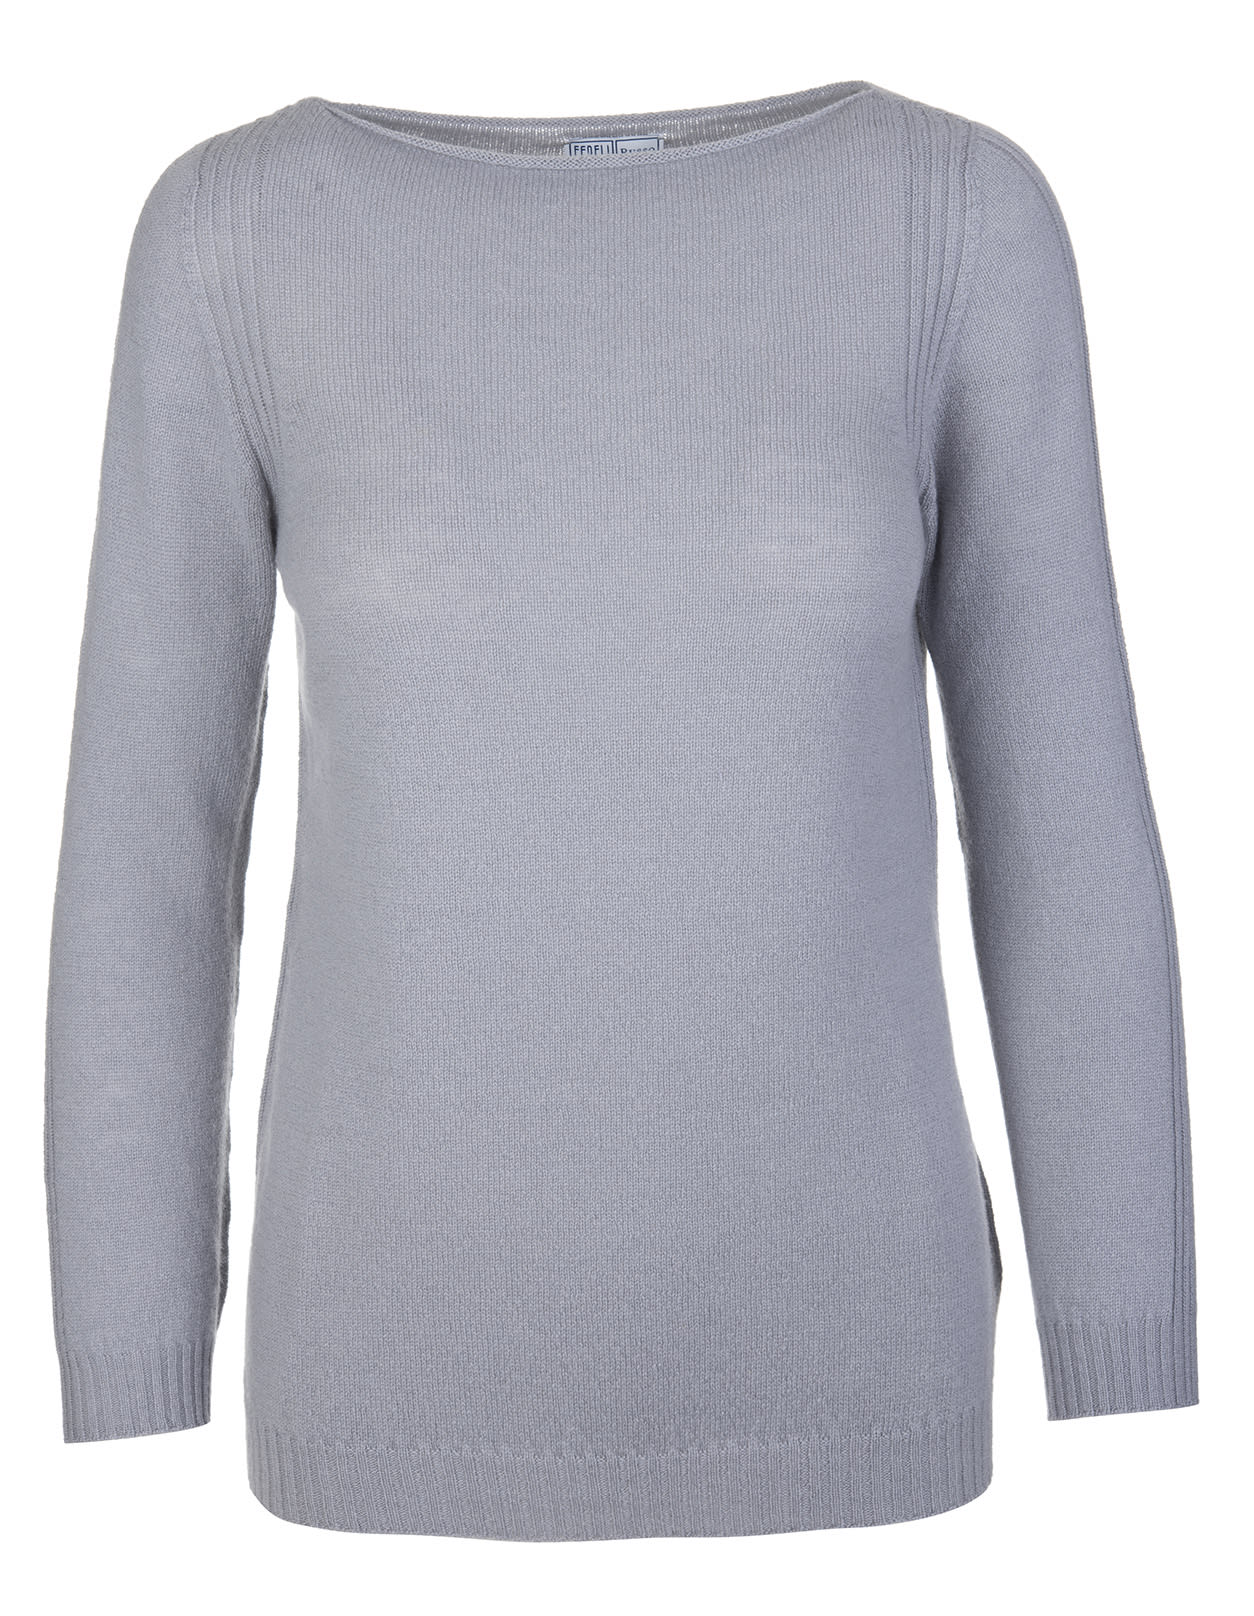 Fedeli Woman Dusty Grey Cashmere Pullover With Boat Neck